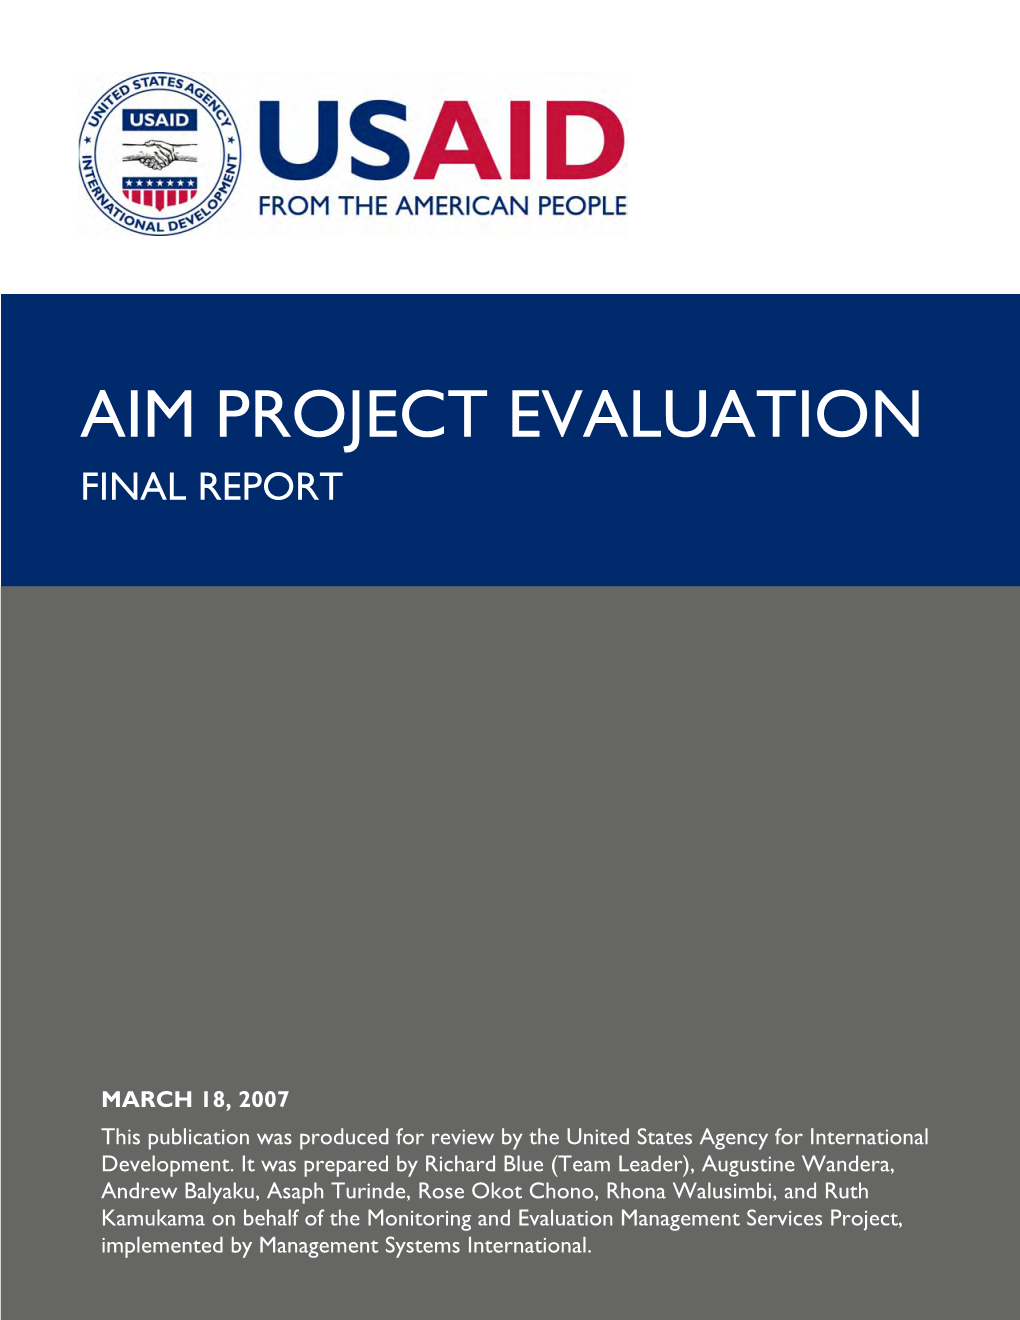 Aim Project Evaluation Final Report